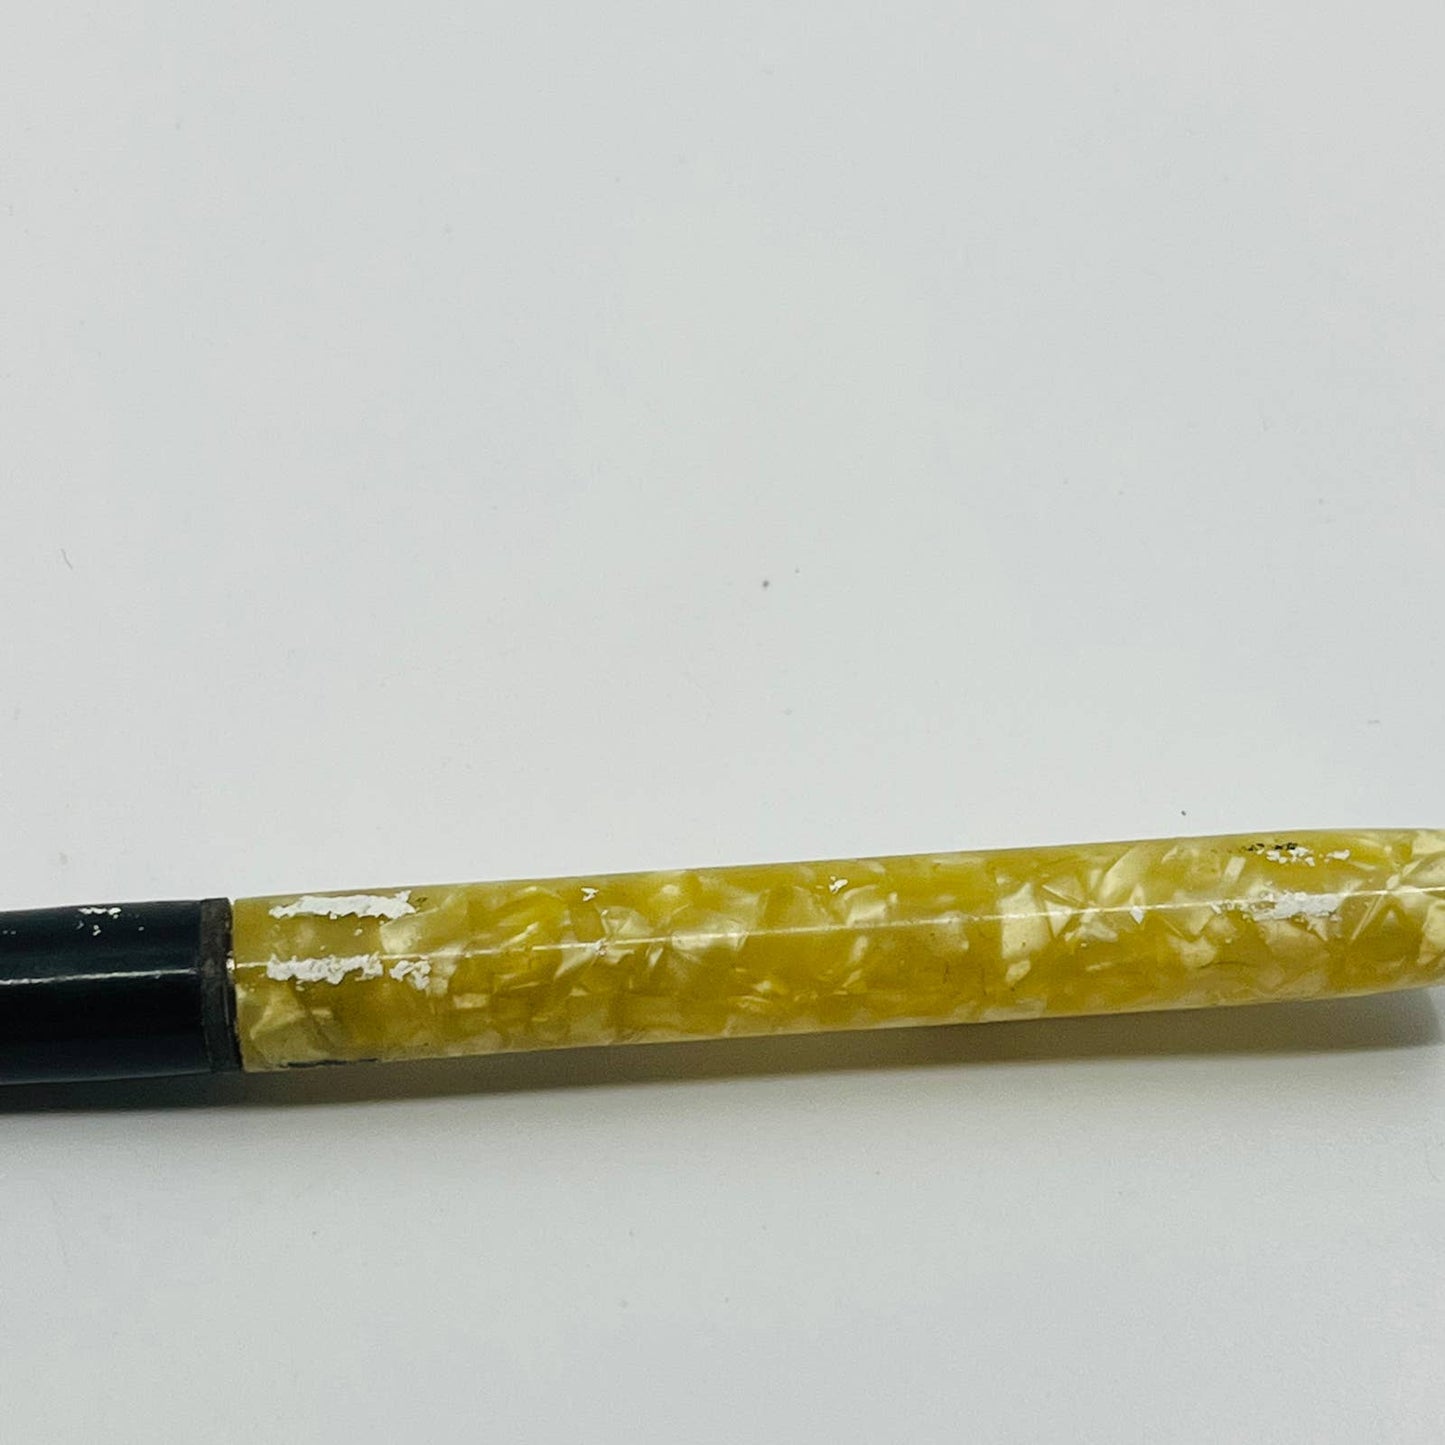 Celluloid Mother of Pearl Mechanical Pencil Ritepoint Eagle Lumber Montreal SB3